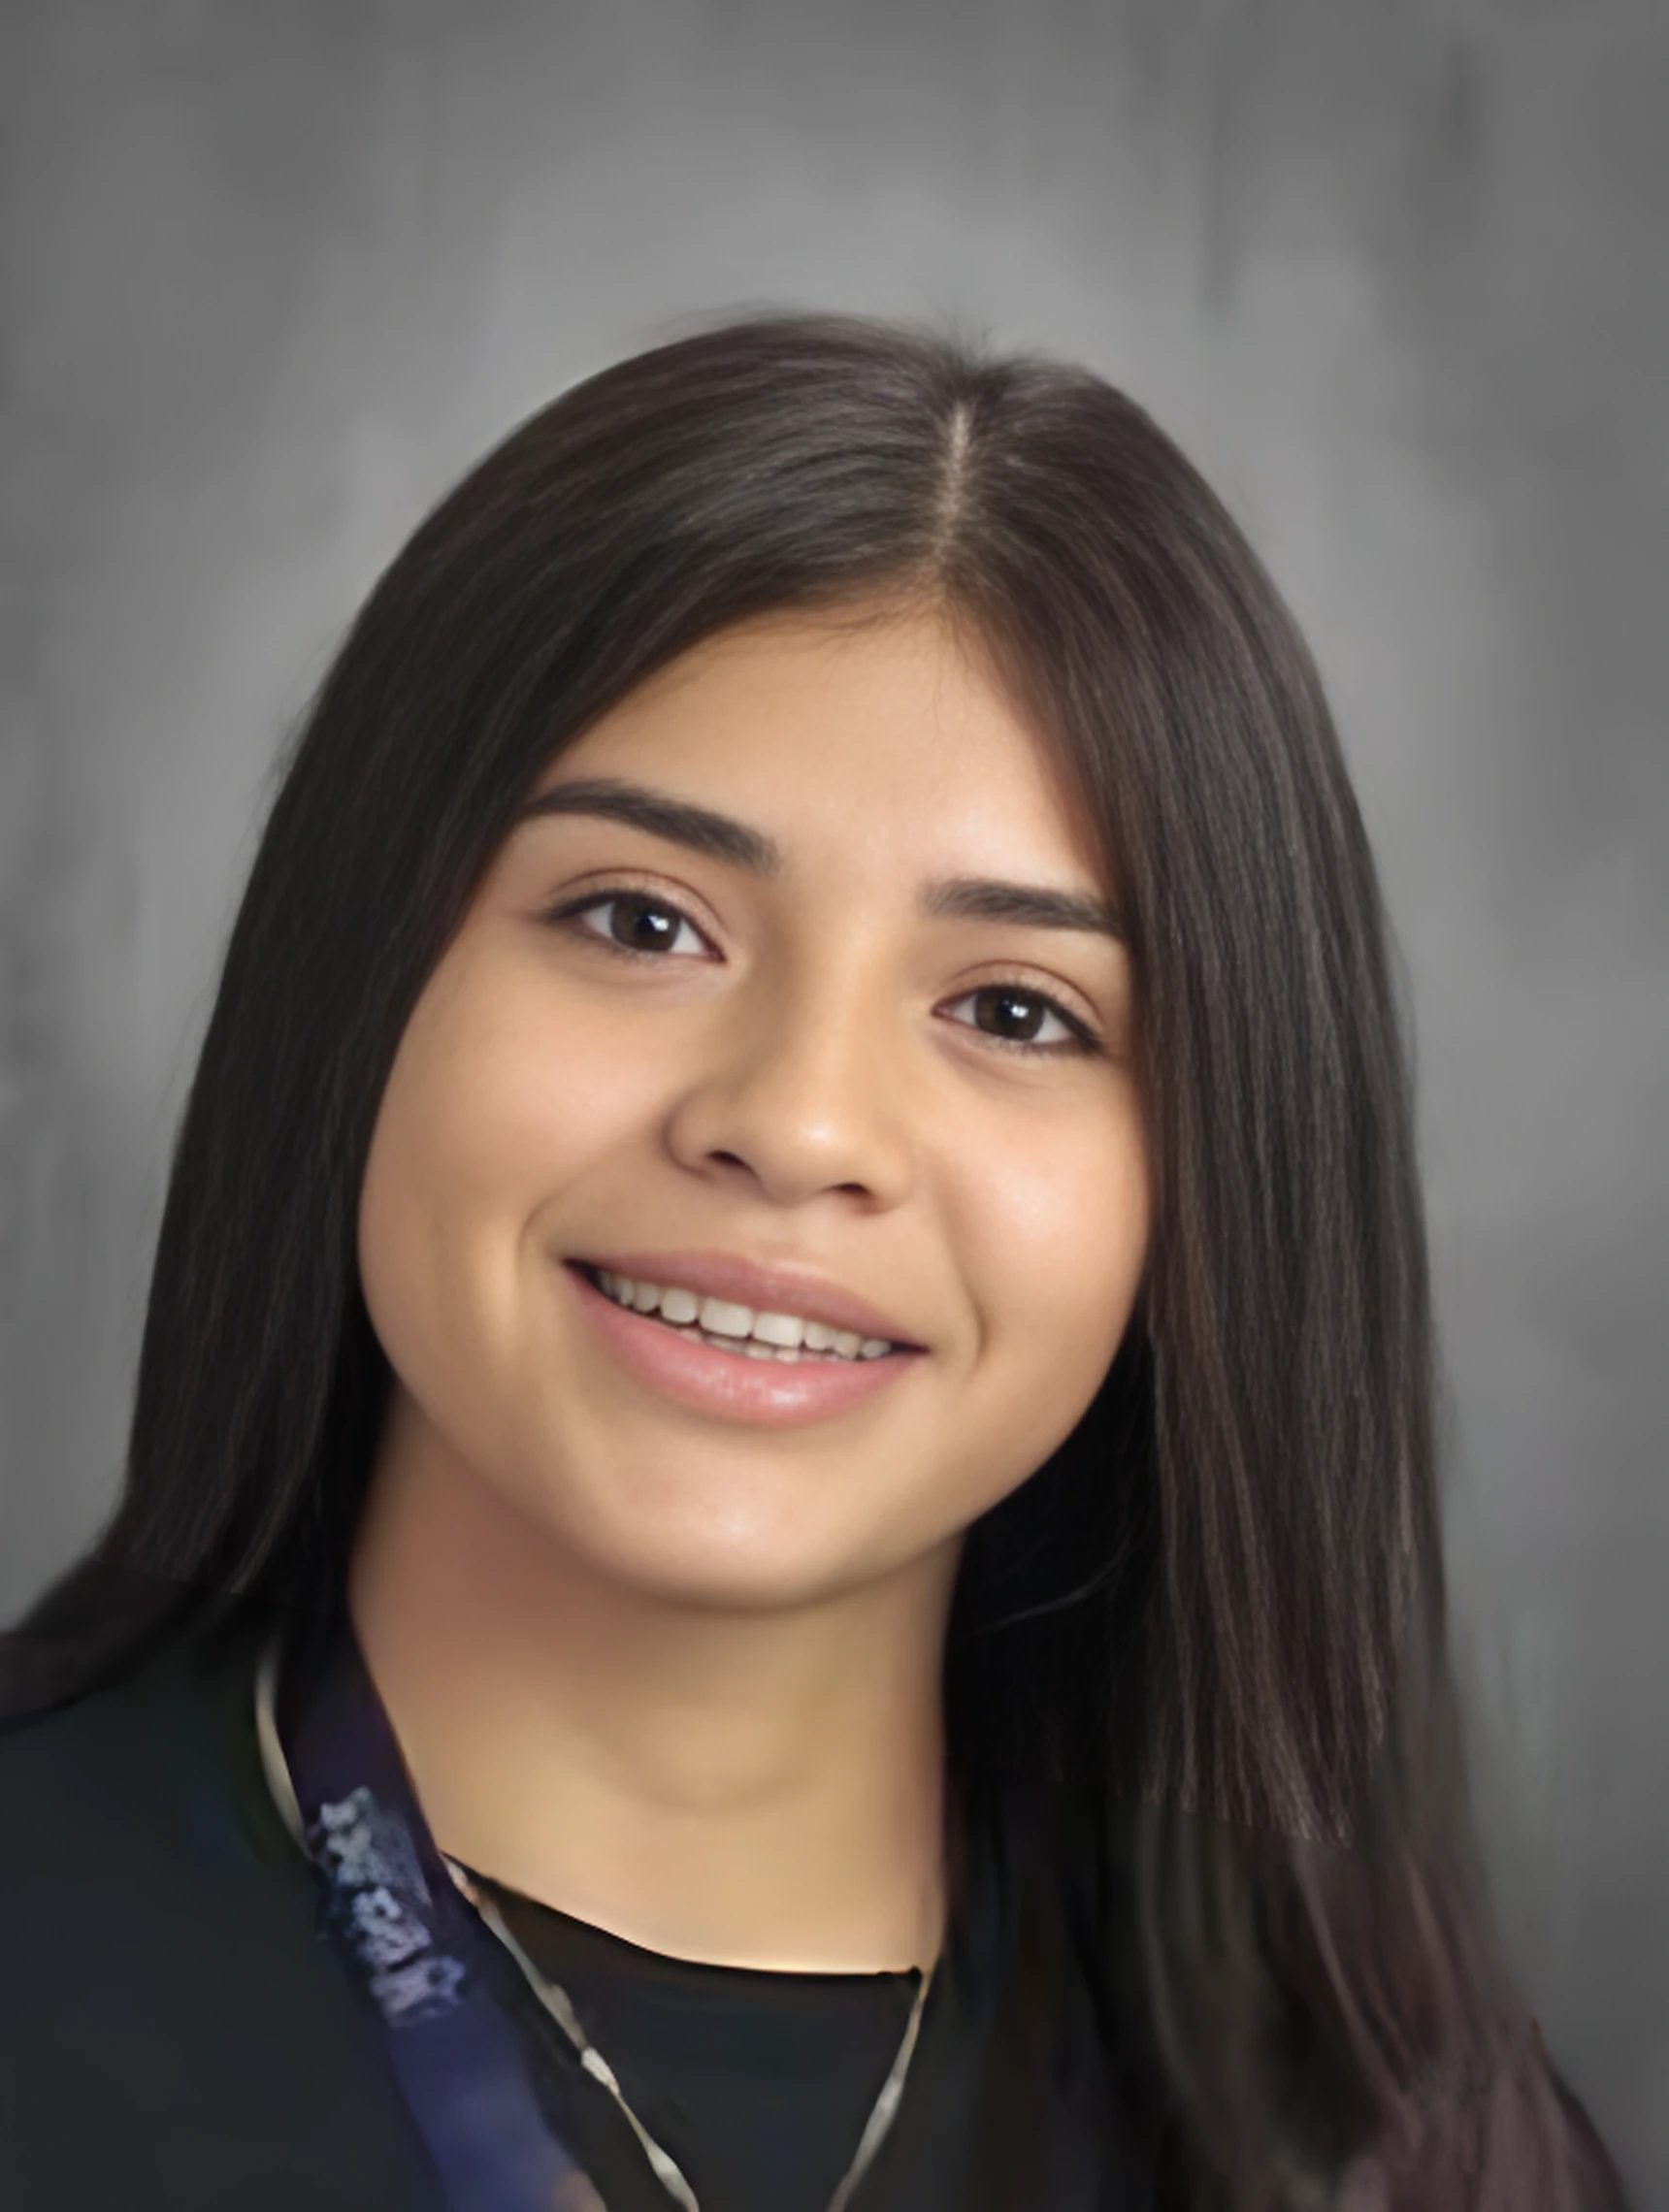 This photo is a headshot of Dayanara Gutierrez, a student at Golder College Prep. She is a young Latine woman with long straight hair. In this photo, she is smiling and wearing a black shirt.